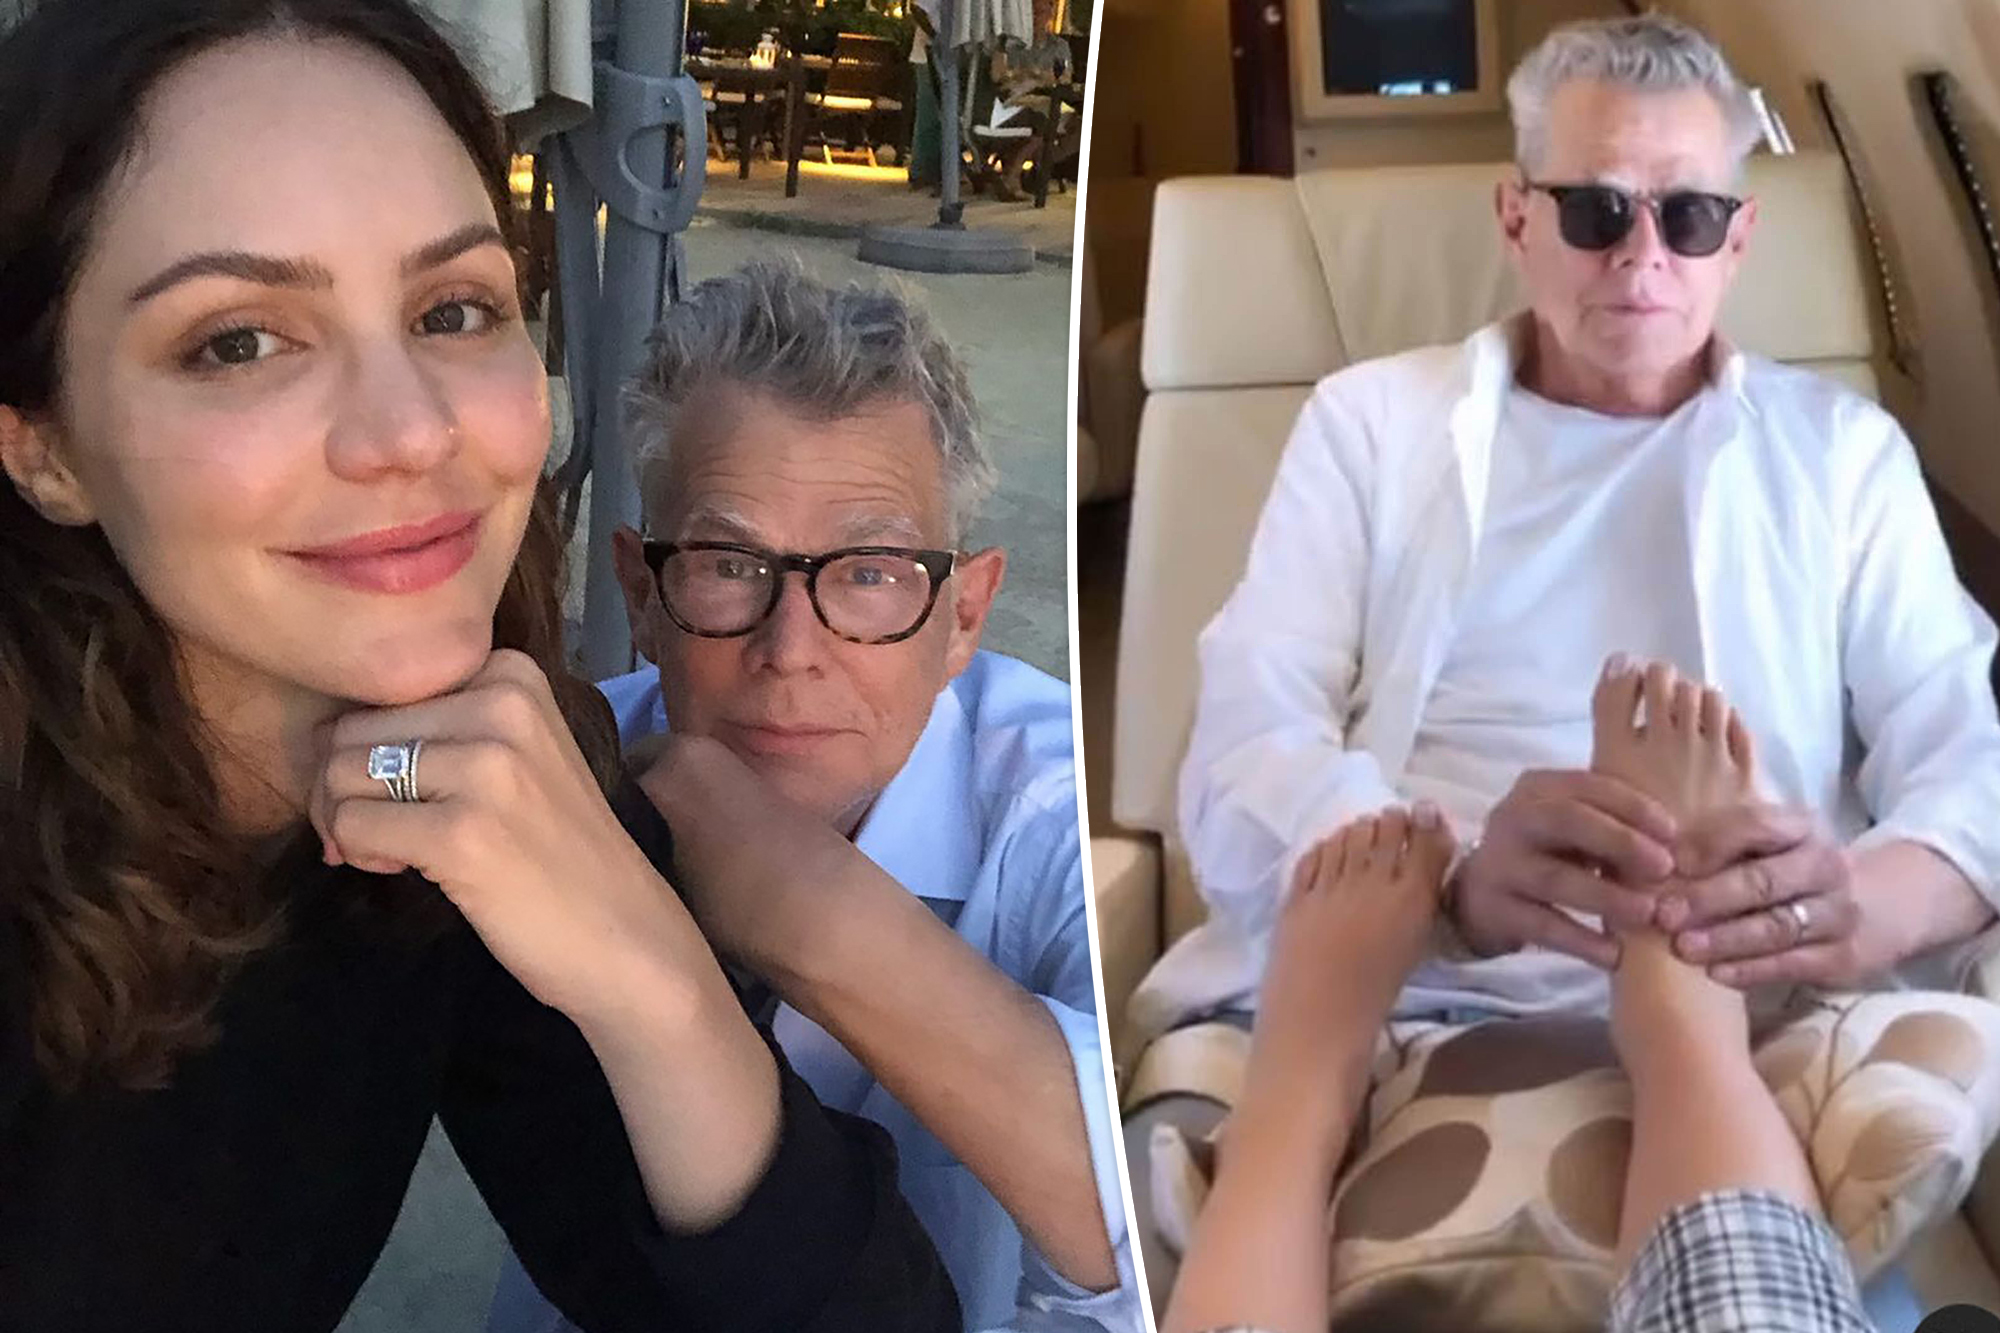 april rose distajo recommends katharine mcphee feet pic